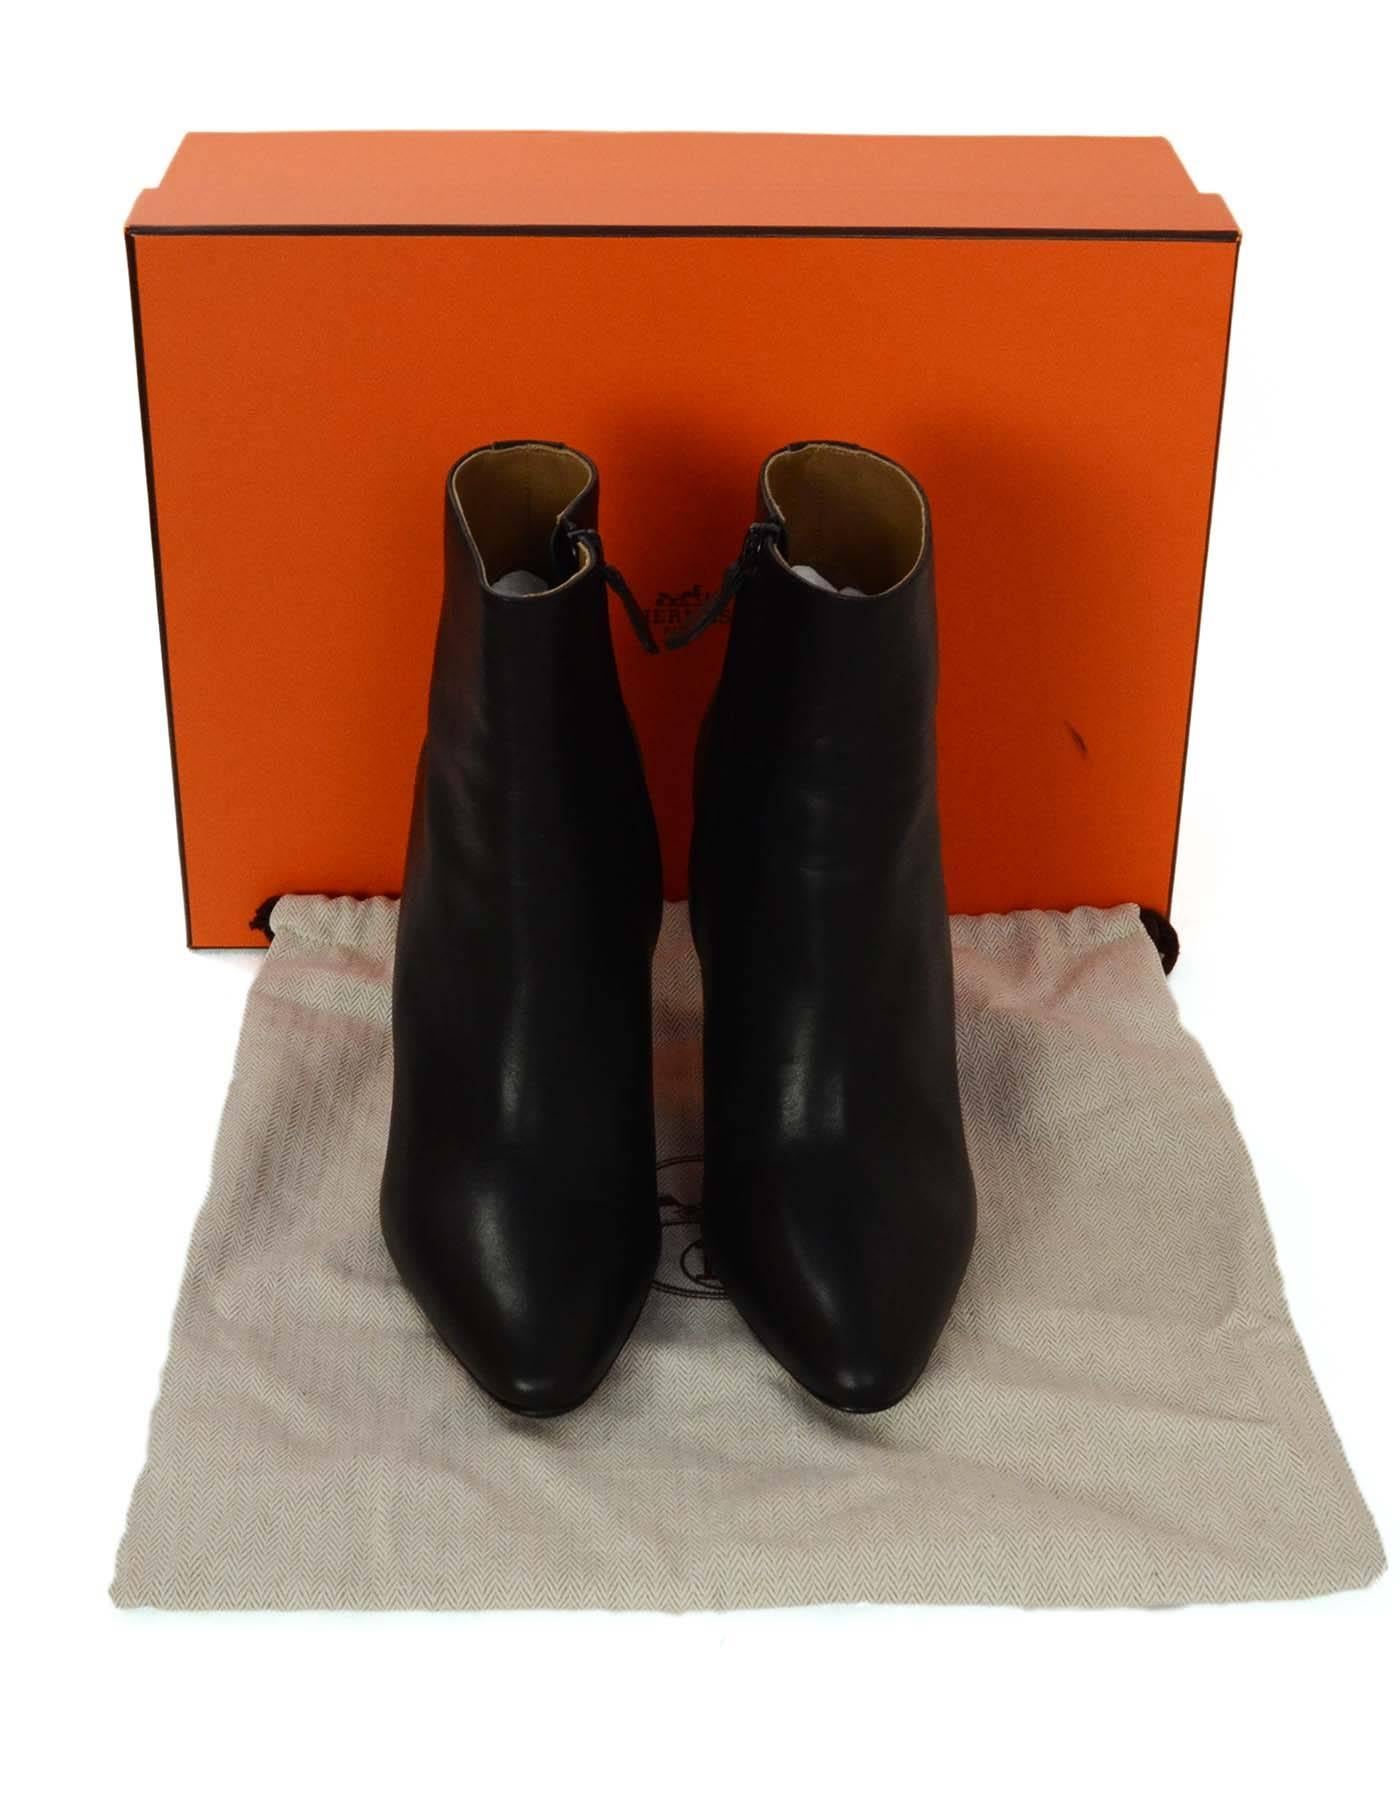 Hermes Black Leather Ankle Booties sz 37 4